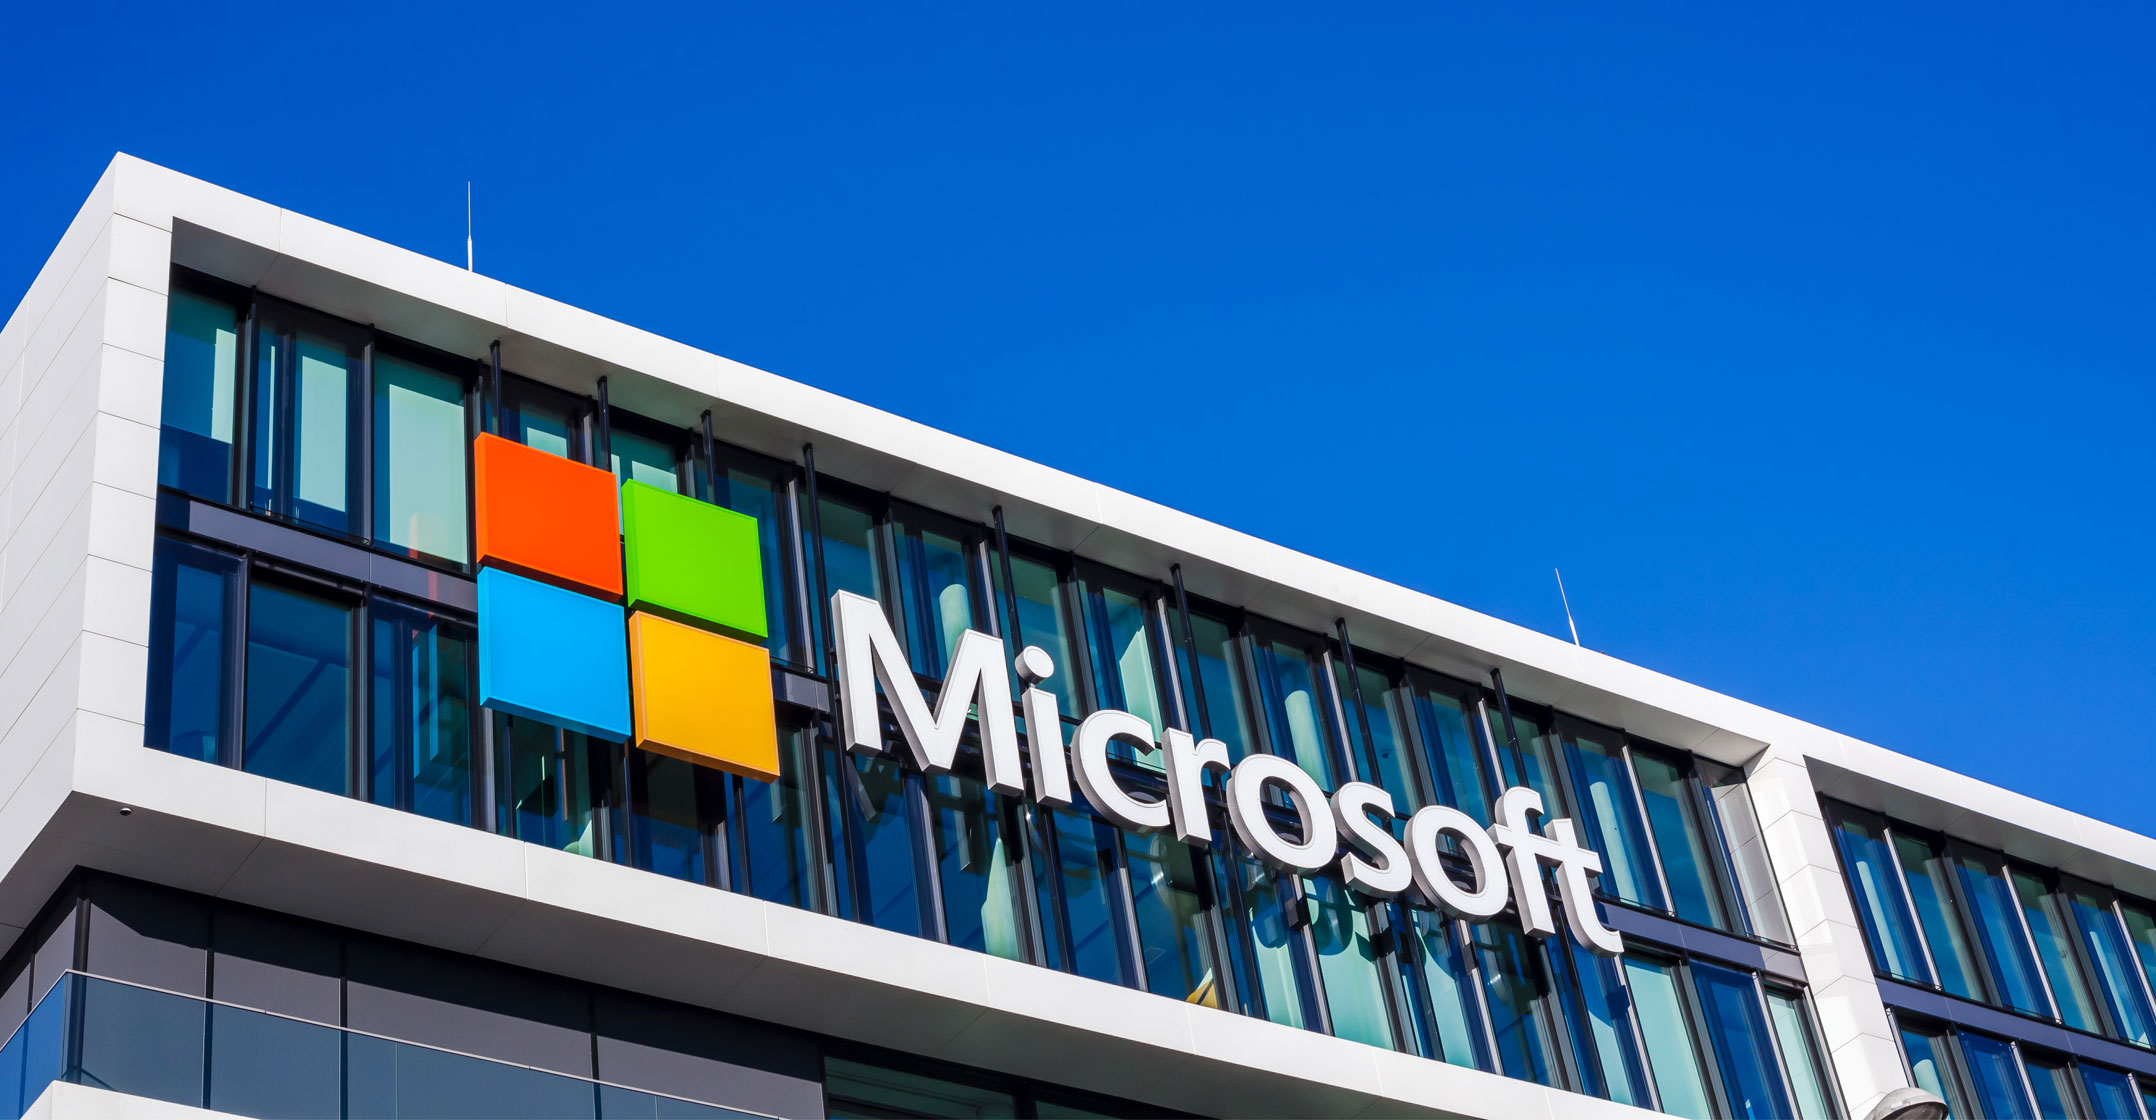 Microsoft under fire over shambolic security practices